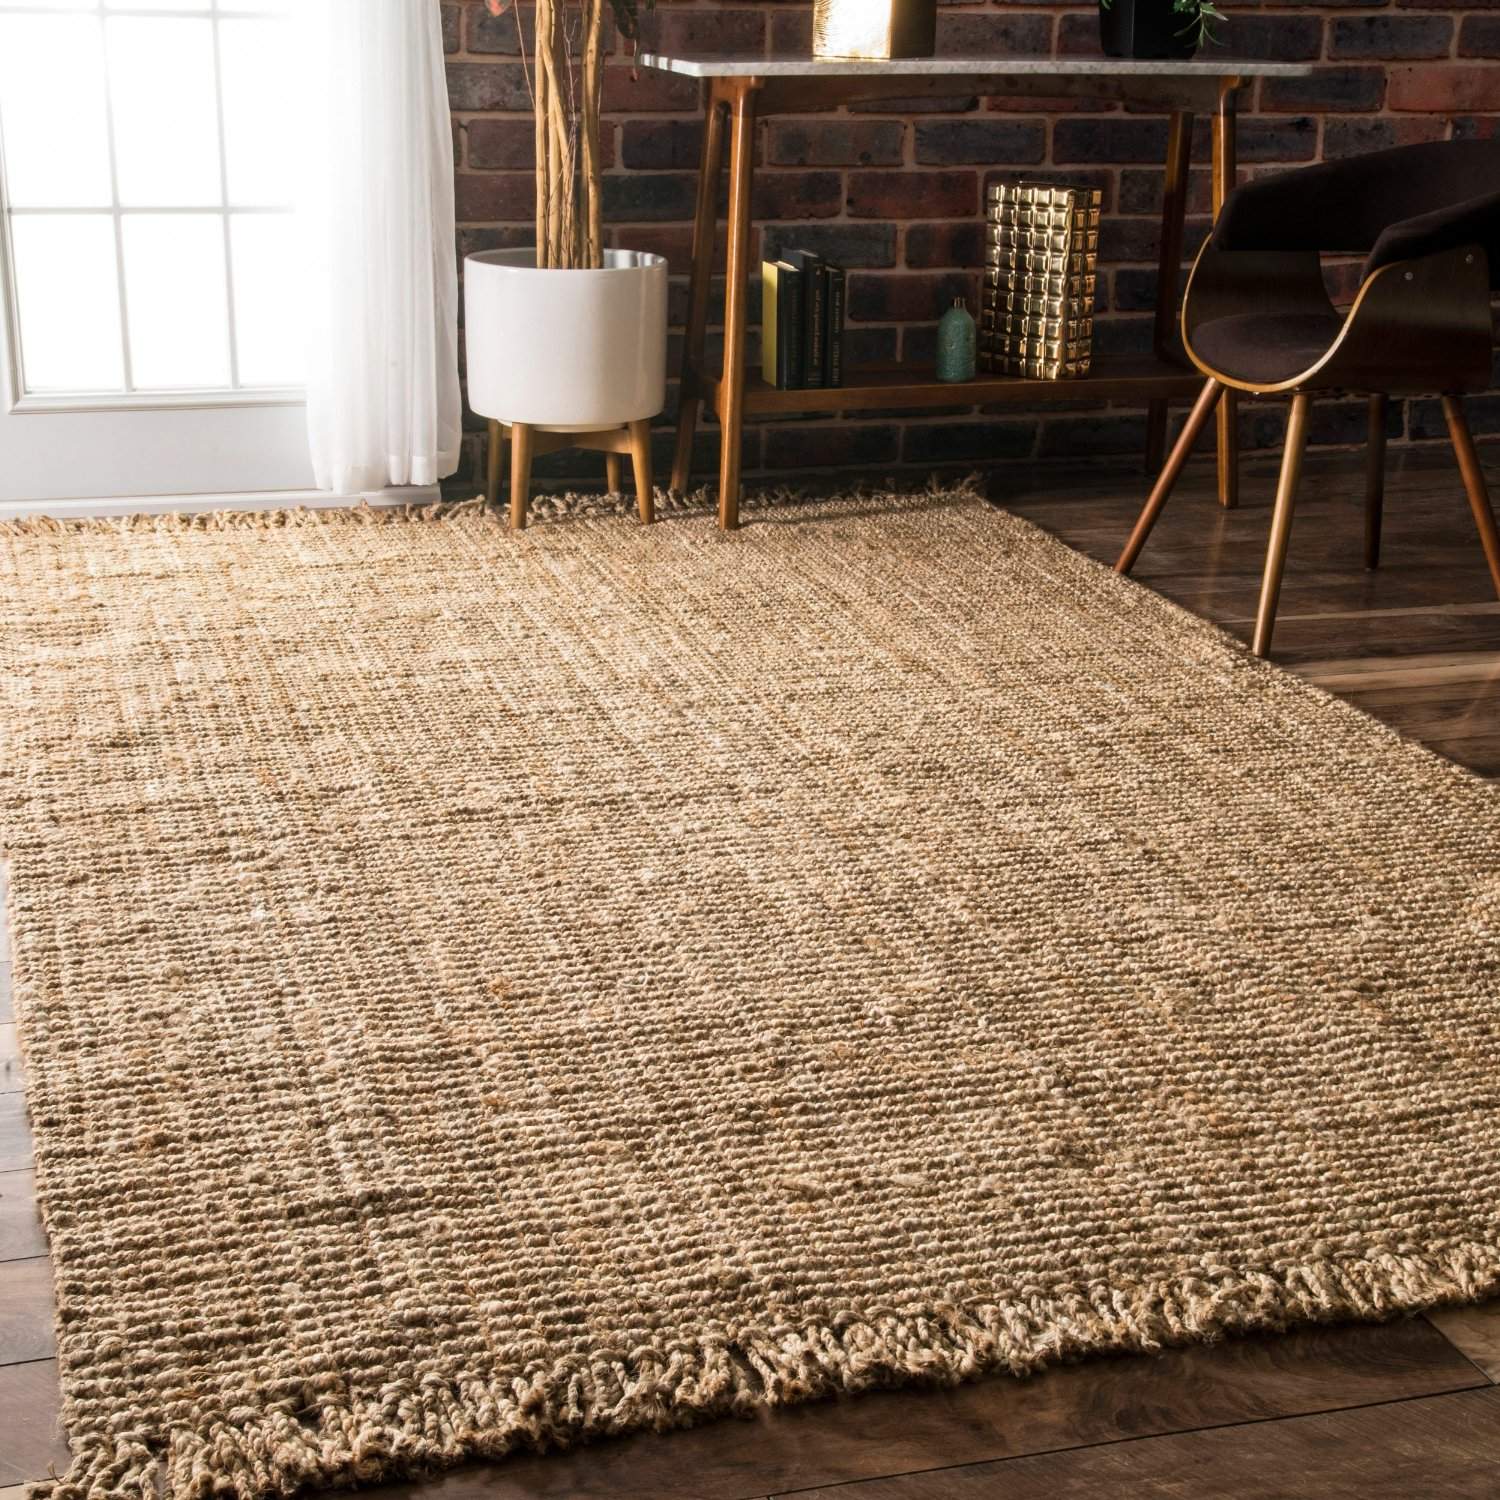 I am drooling over all of the texture in these natural fiber rugs!